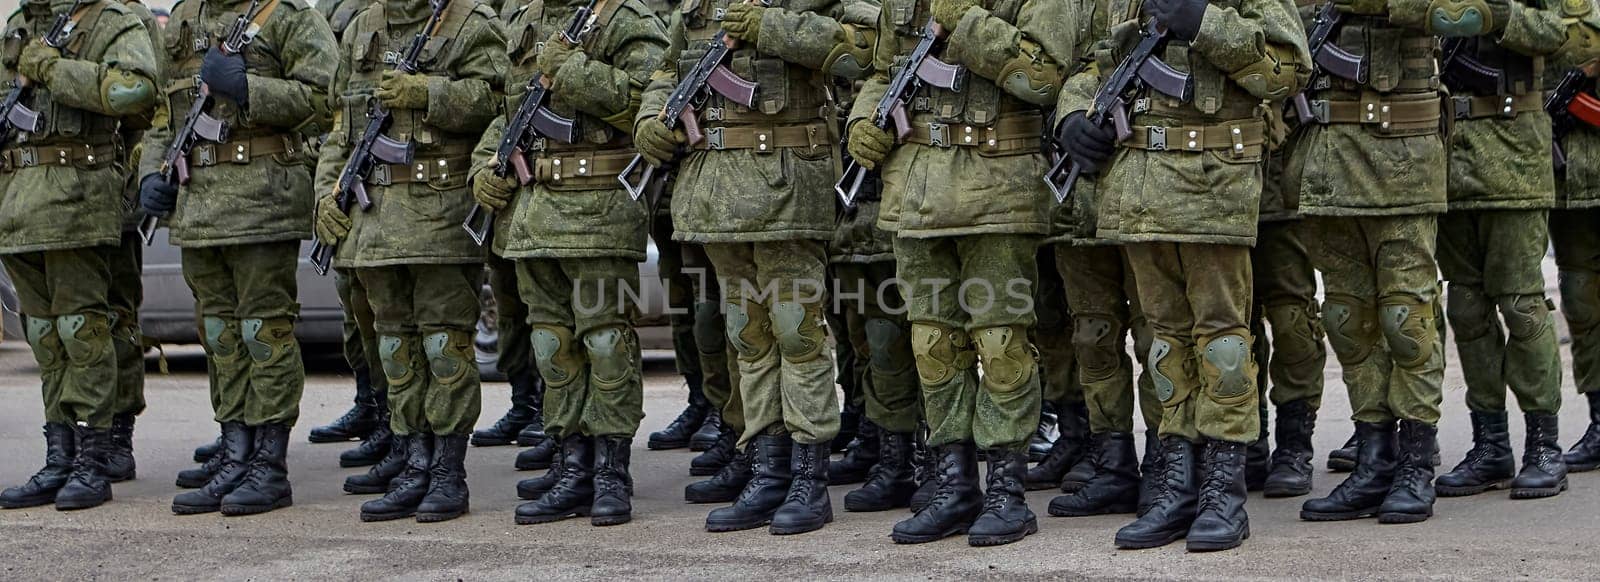 Military Parade Army Soldiers In Camouflage Marching Together In Uniformed Formation by Hil